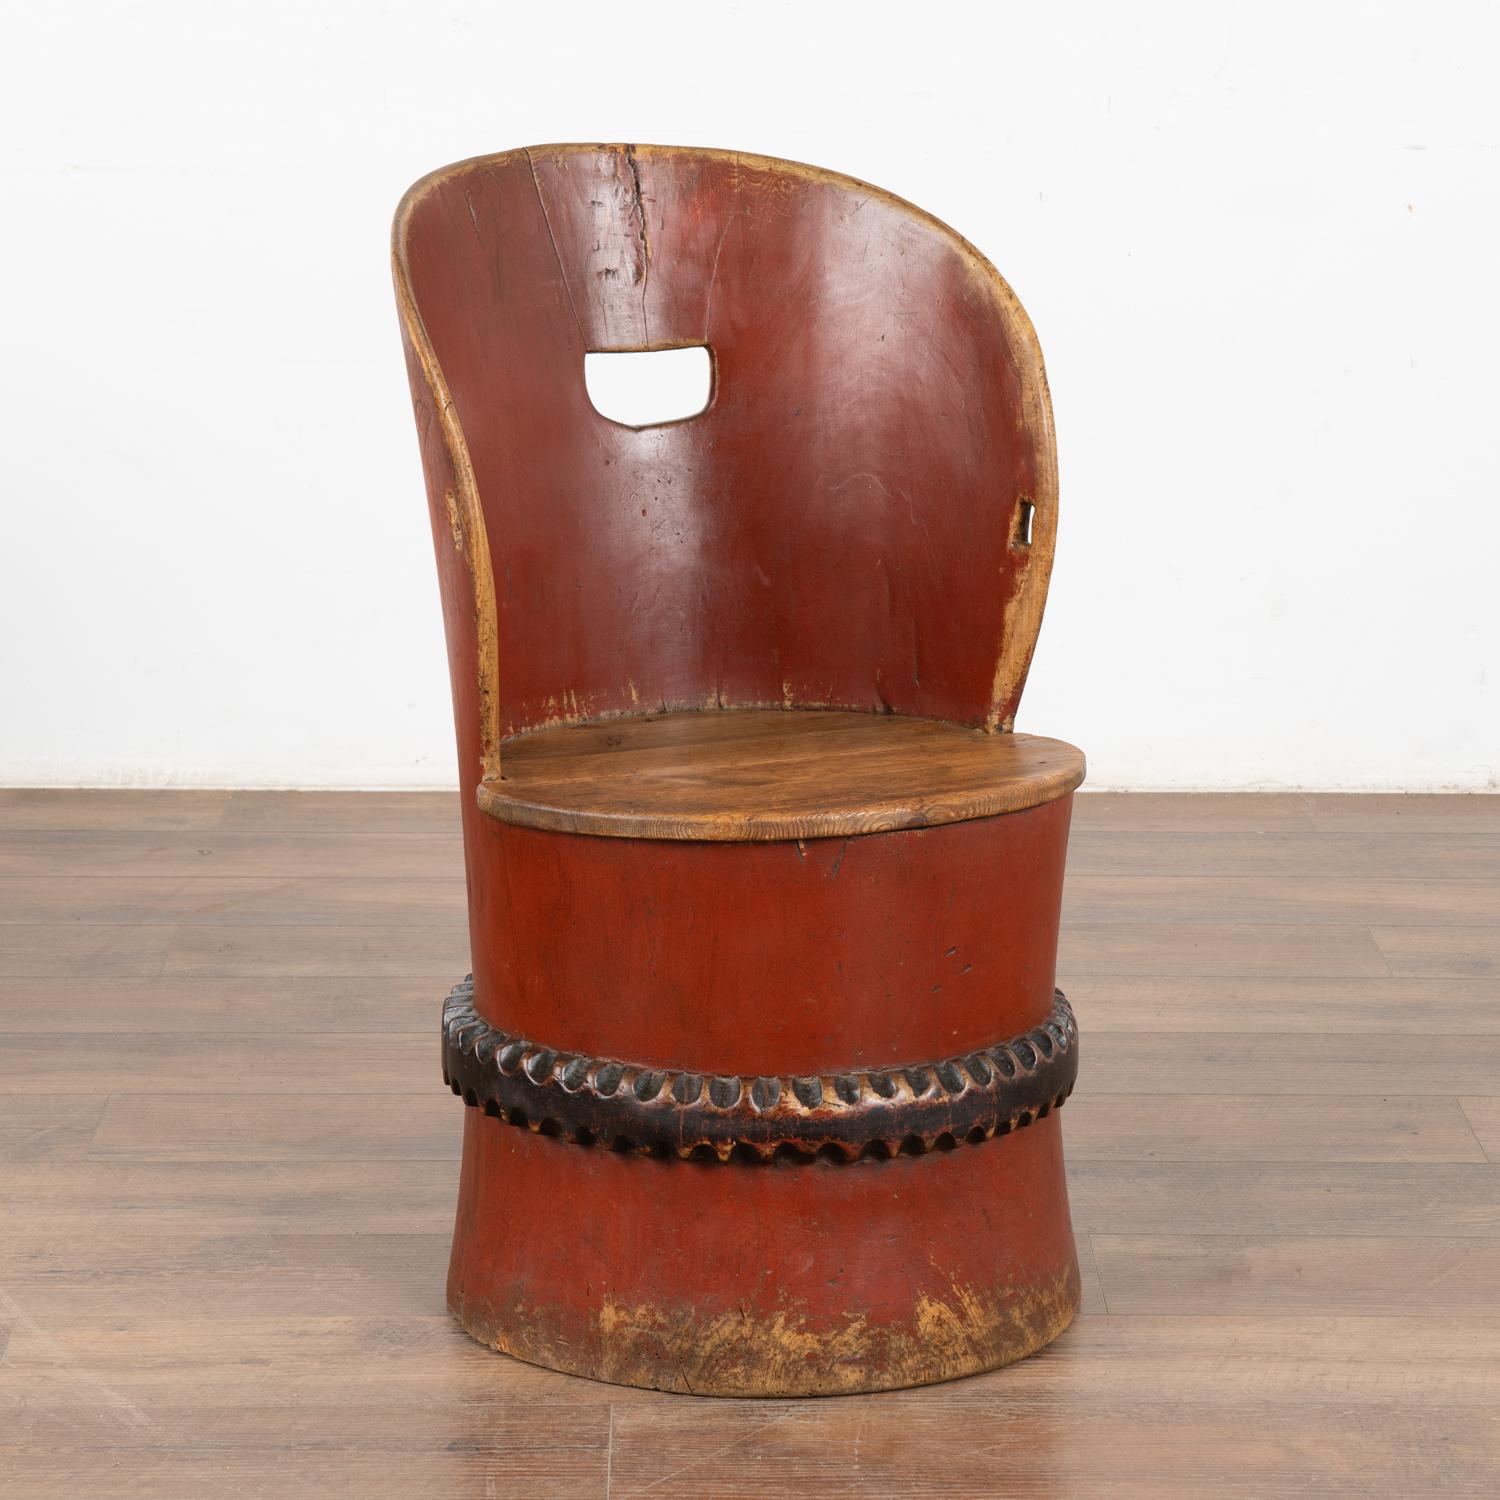 Antique carved and painted kubbestol, a traditional Scandinavian chair crafted from a single log.
The lovely original red paint is accented by a carved and black painted band. Much of the original finish is worn down to the natural wood below adding